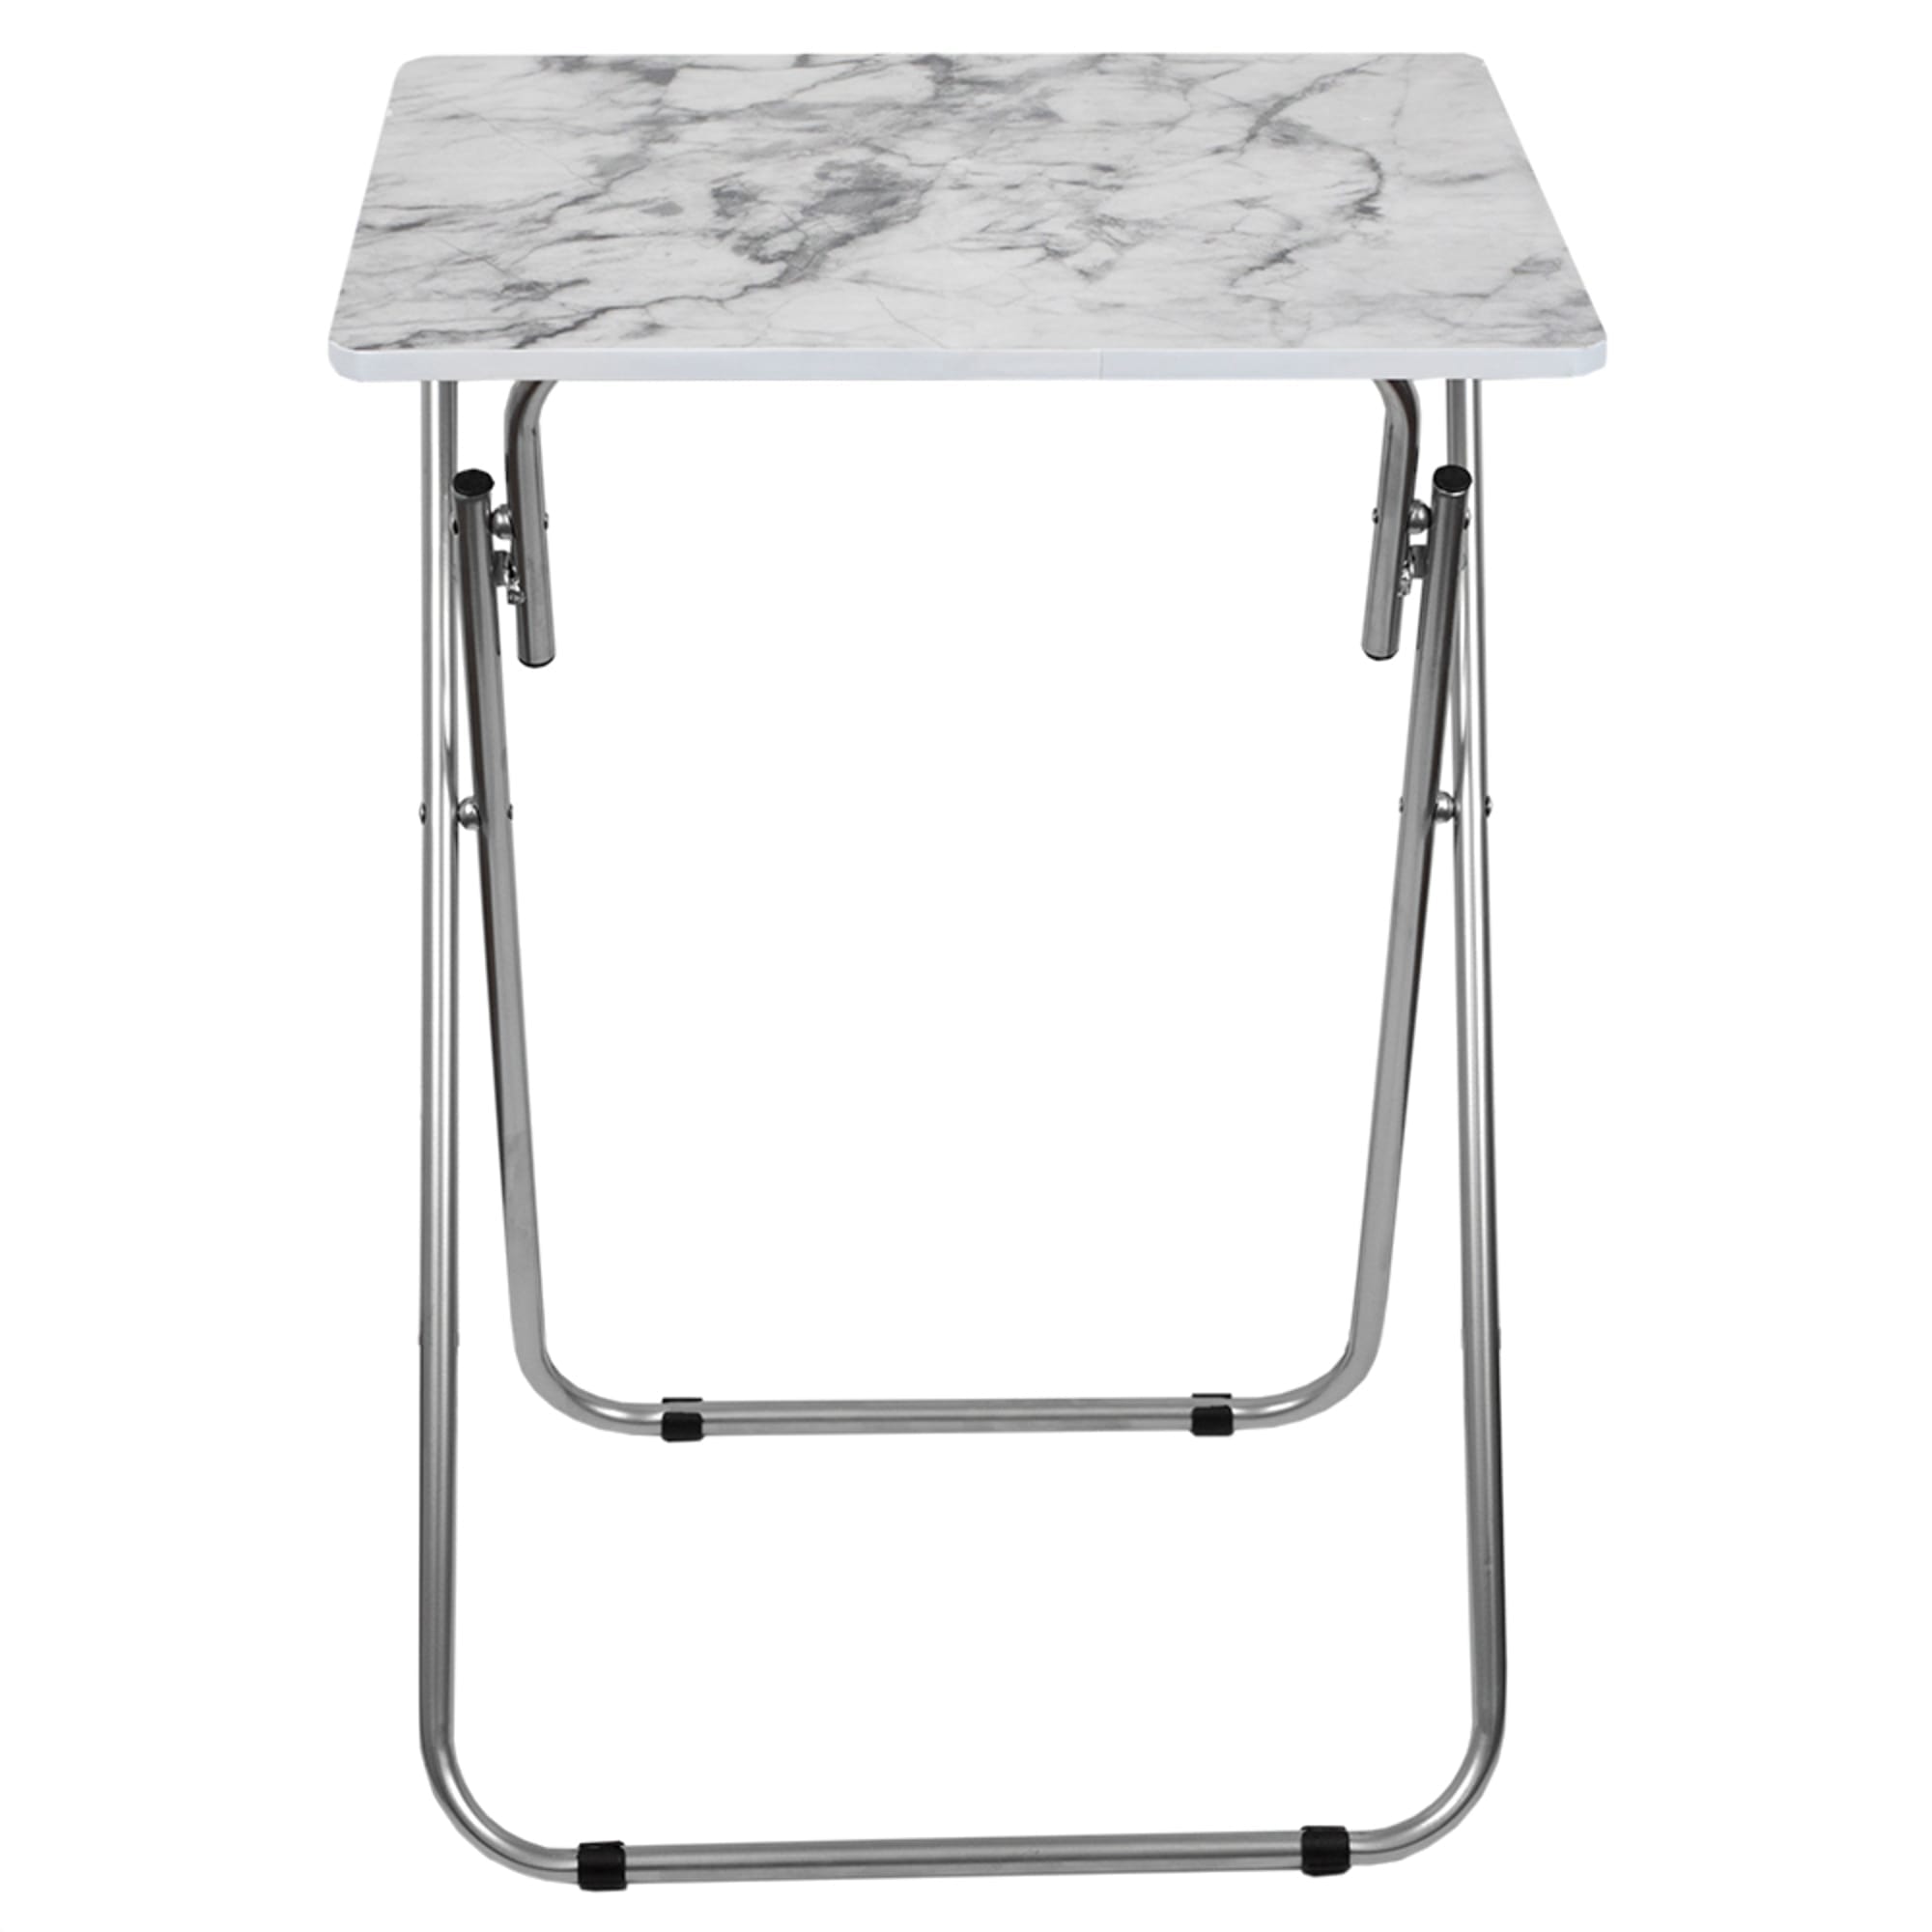 Home Basics Marble Design Multi-Purpose Foldable Table, Grey/White $15.00 EACH, CASE PACK OF 6